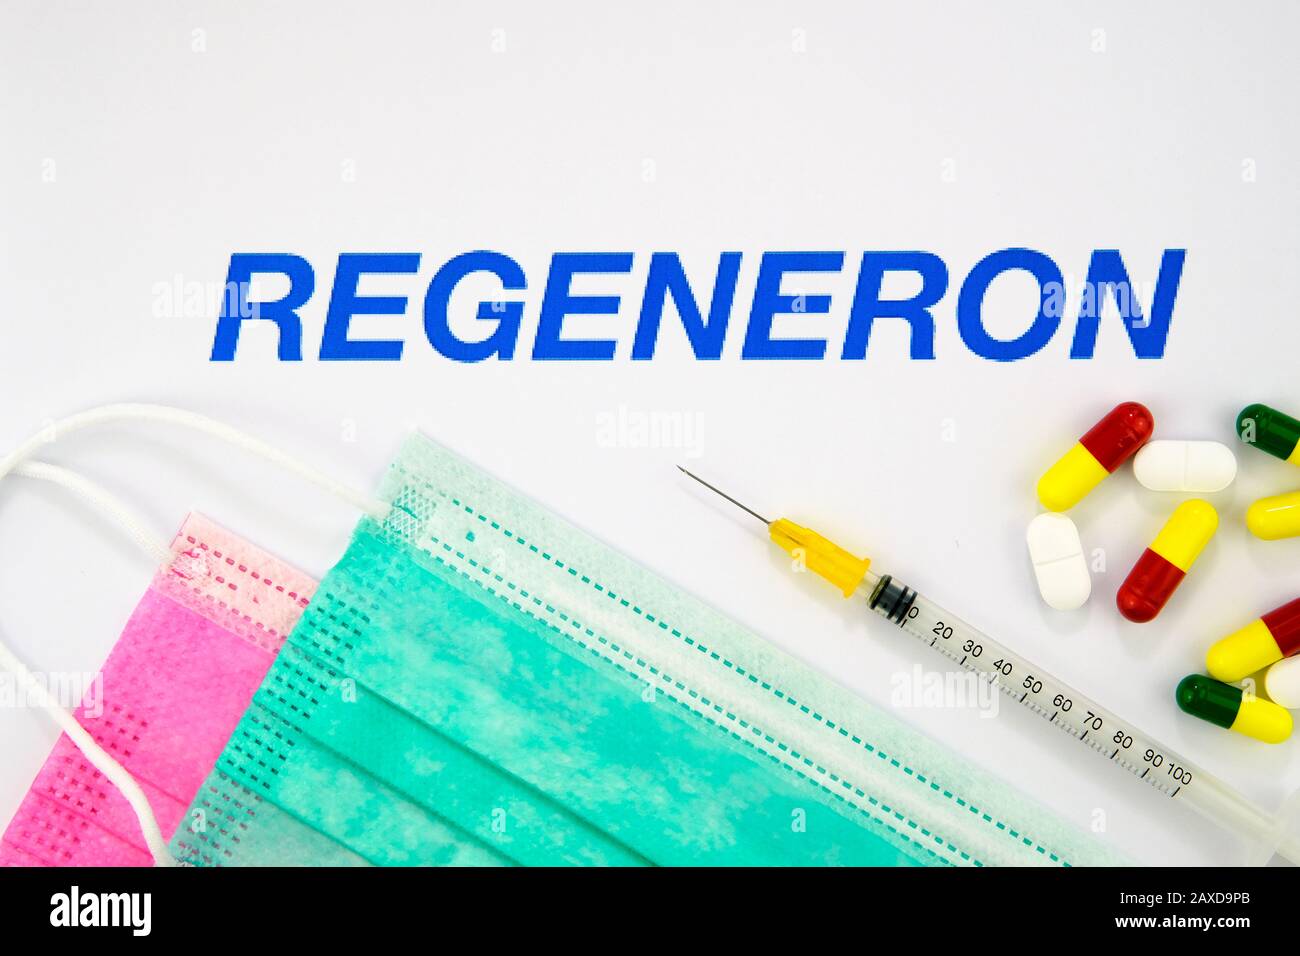 Regeneron Pharmaceuticals company logo seen on the brochure with the viral masks, syringe and pills. Concept photo Stock Photo